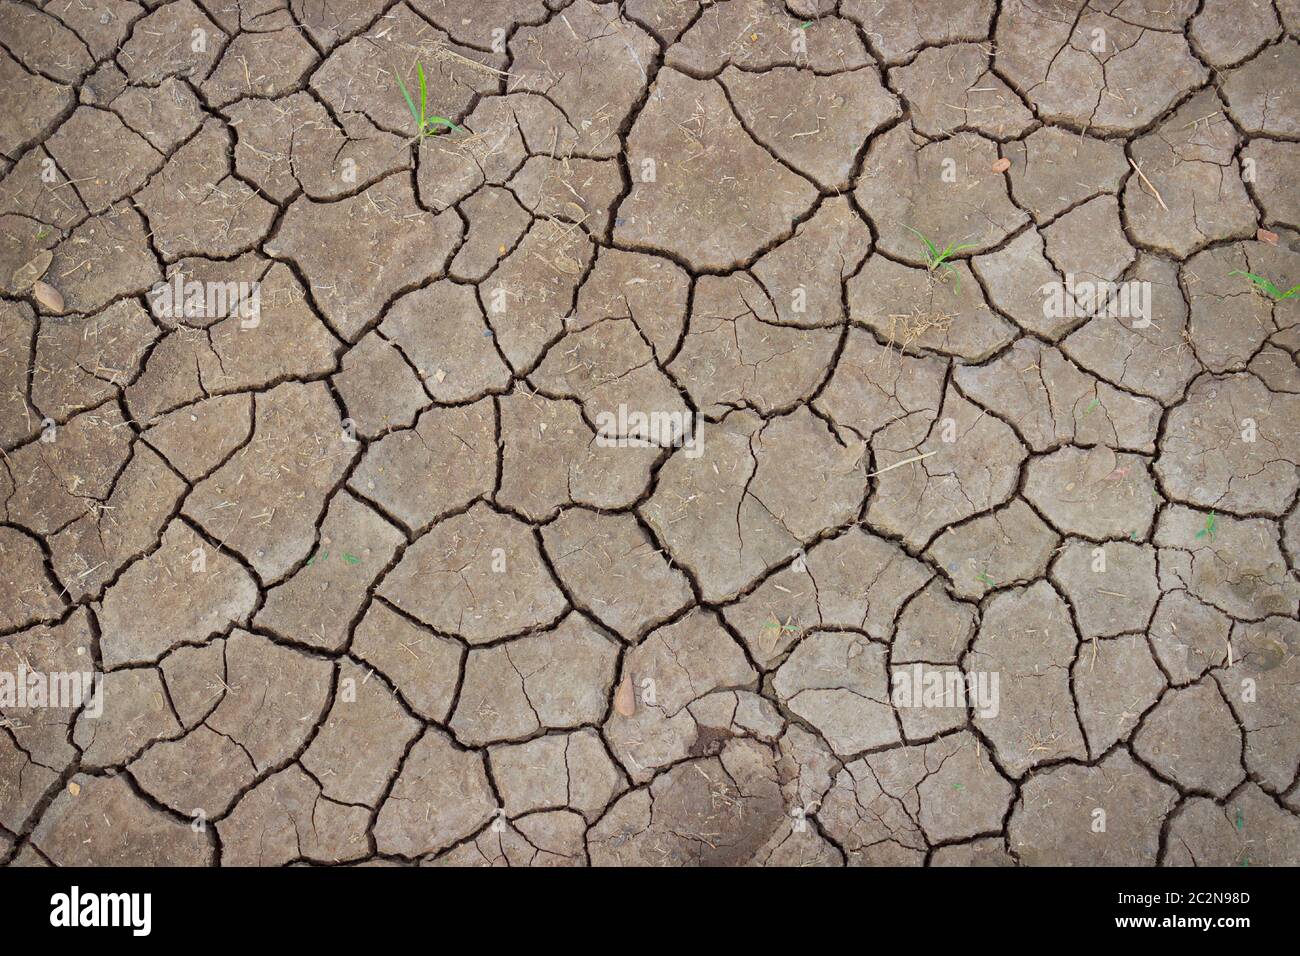 Soil cracked by the scorching sun Stock Photo